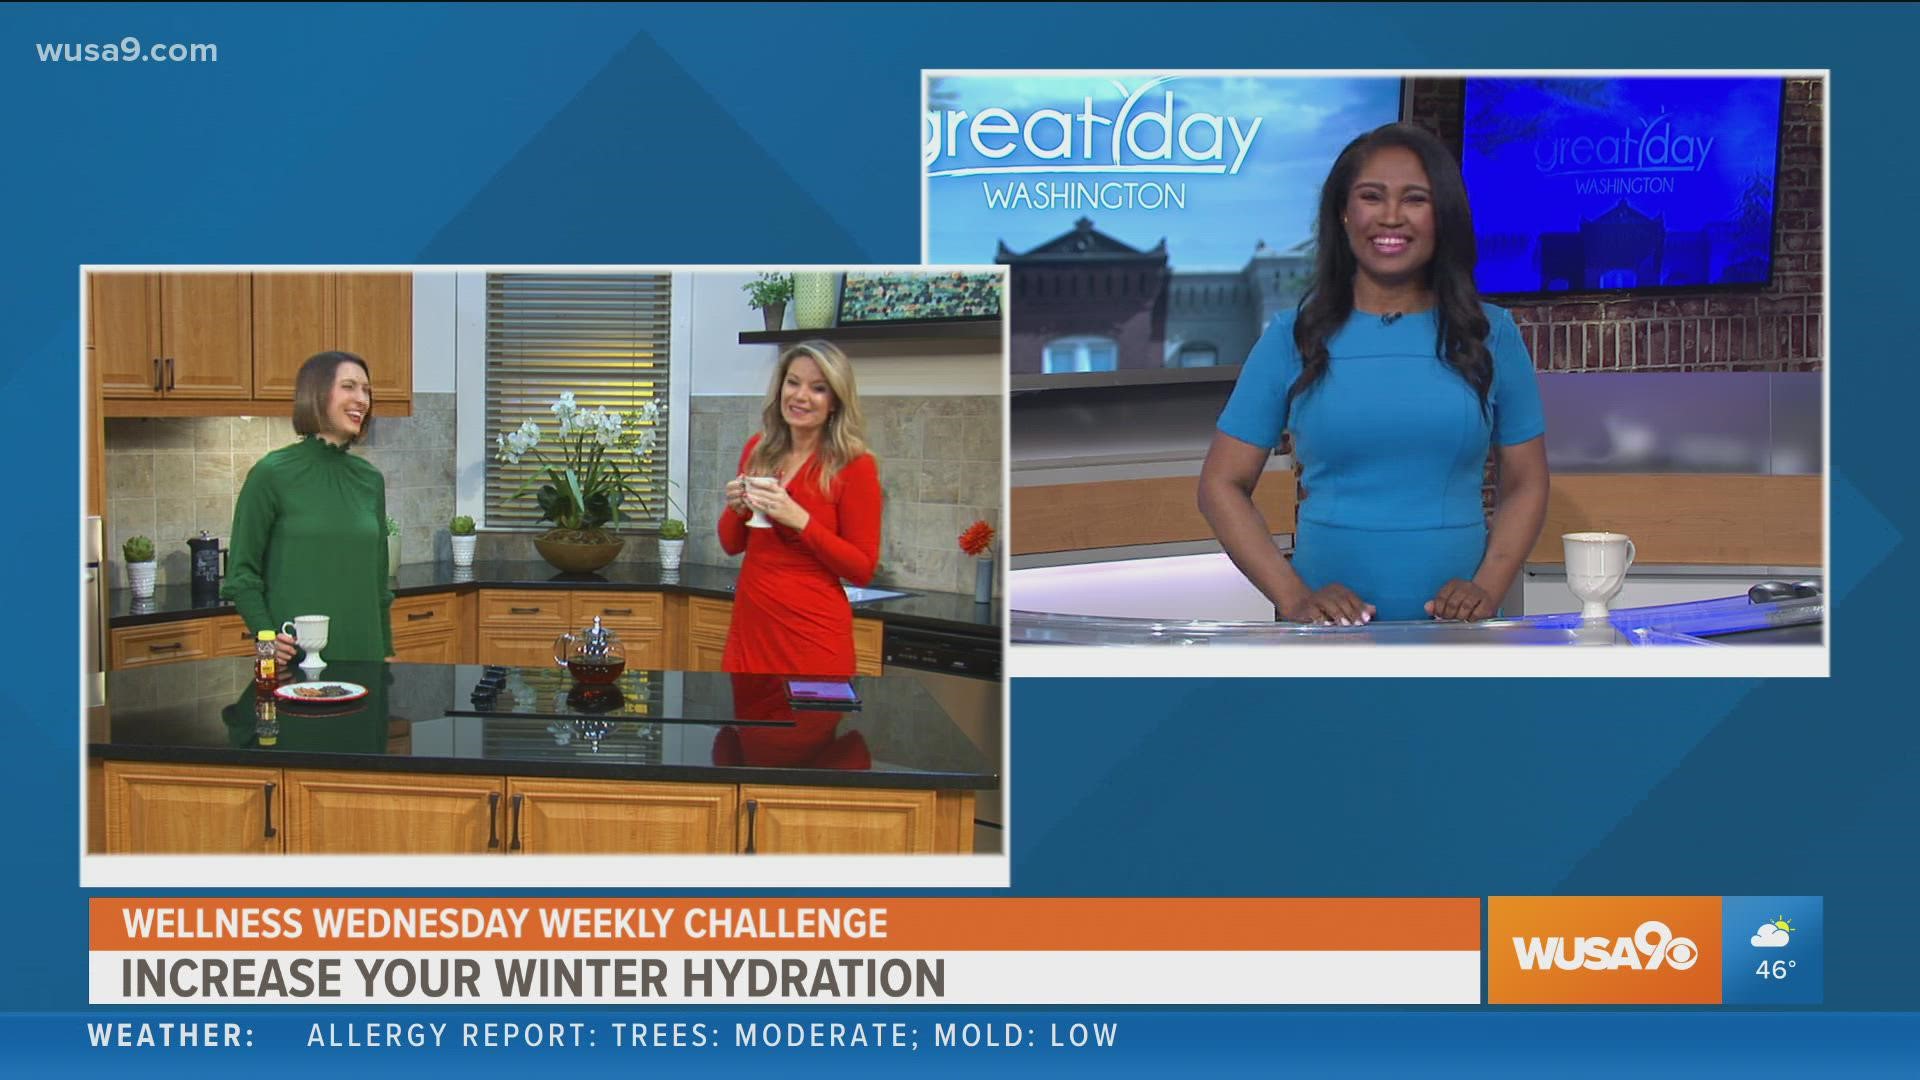 In this week's Wellness Wednesday Weekly Challenge try increasing your winter hydration to close out the season!